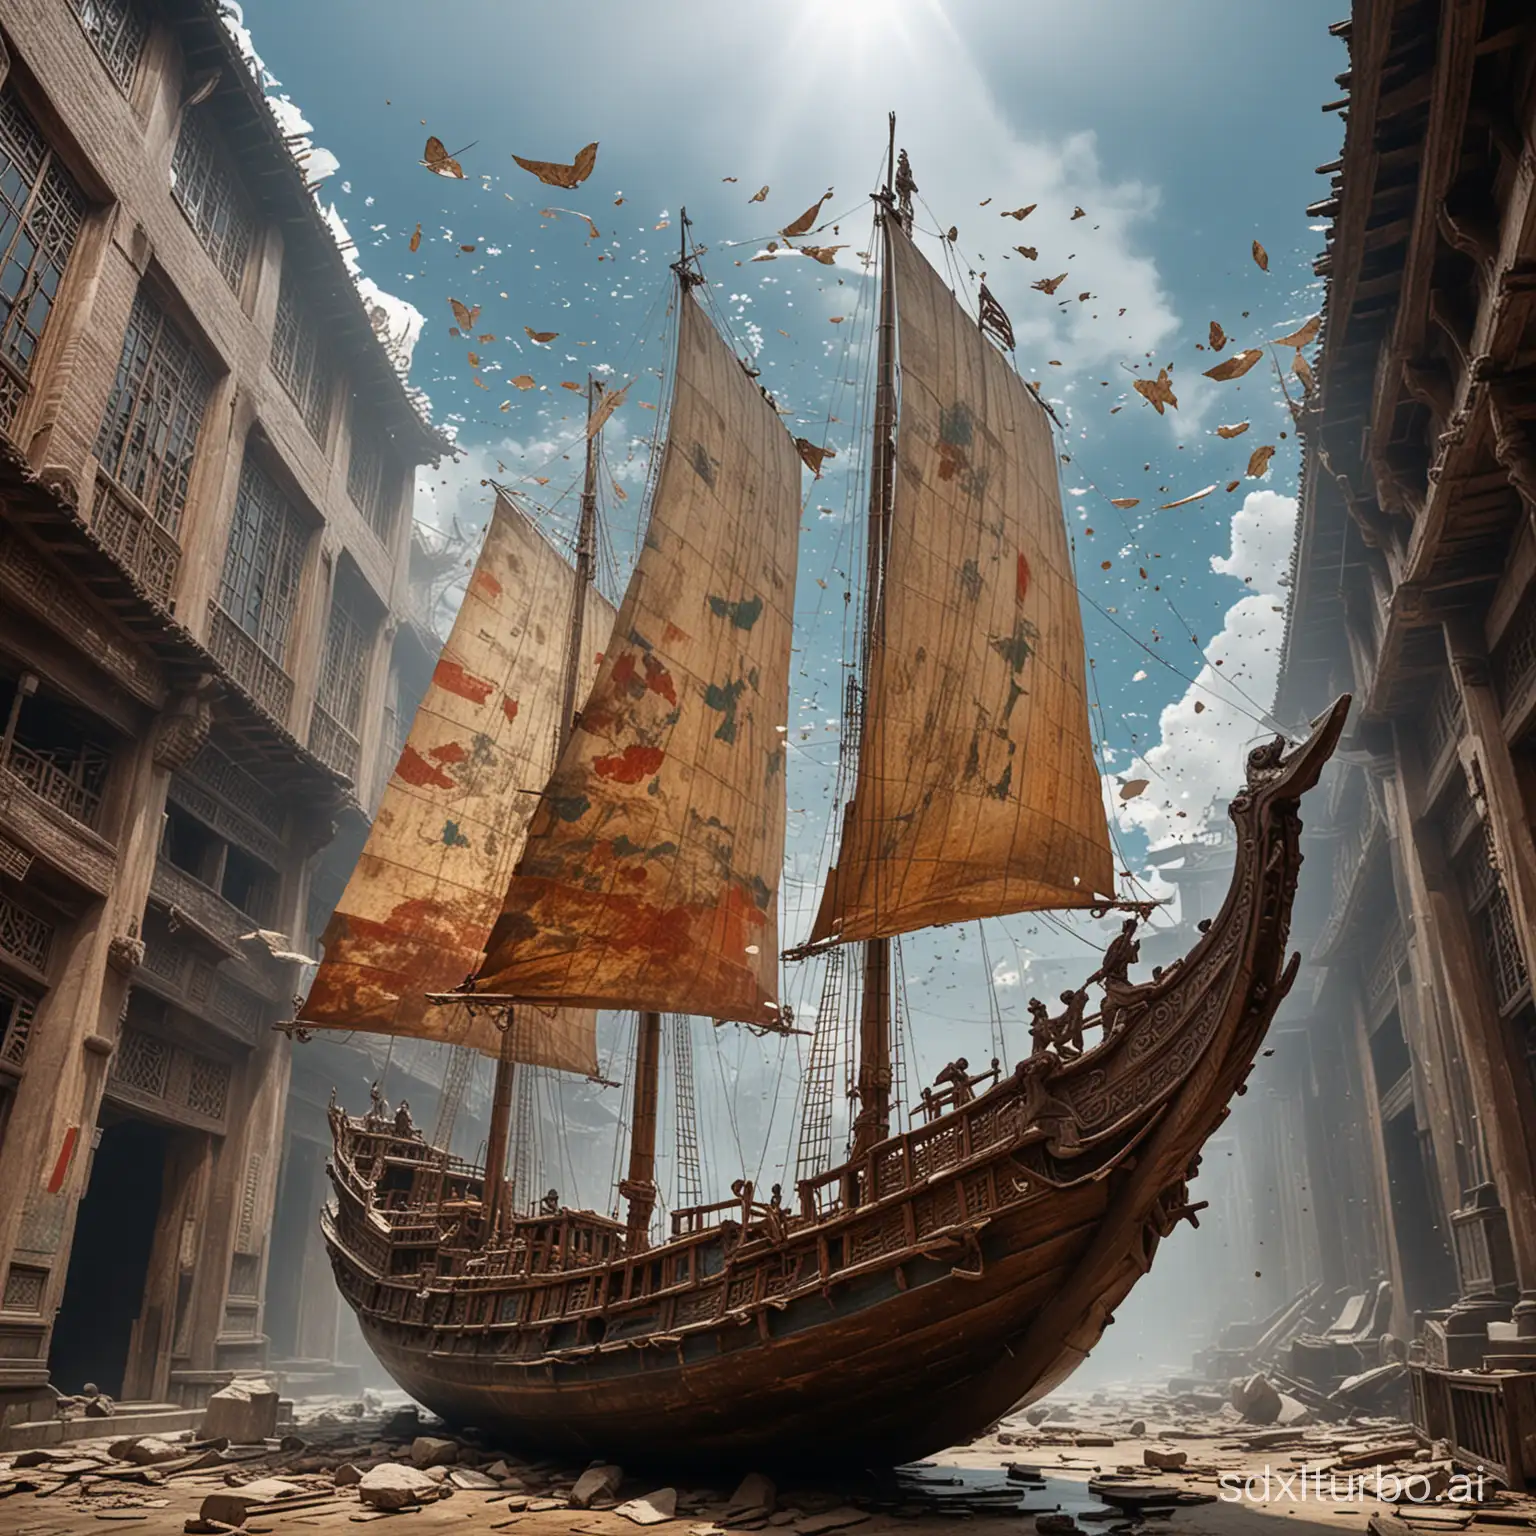 Looking up at the sky. A 3D model of an ancient Chinese carved bow painted large ship and a large sailboat in the sky is made of old materials that have weathered for many years. This big ship drifted into the sky and collided with the glass curtain of the old building, shattering and splattering glass.